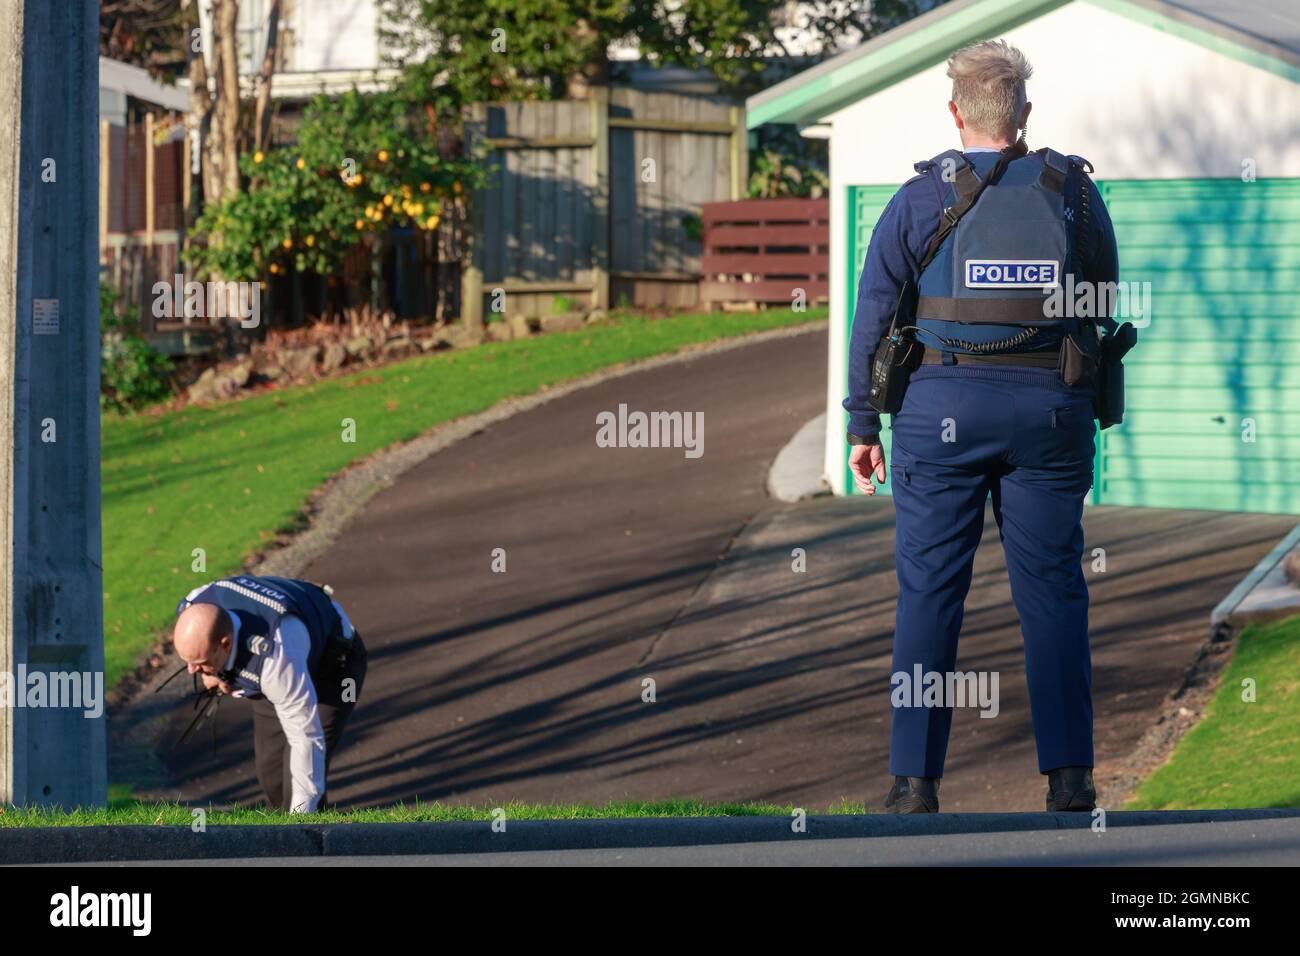 Members of the New Zealand police force in a suburban area. One stands guard while another searches the ground Stock Photo